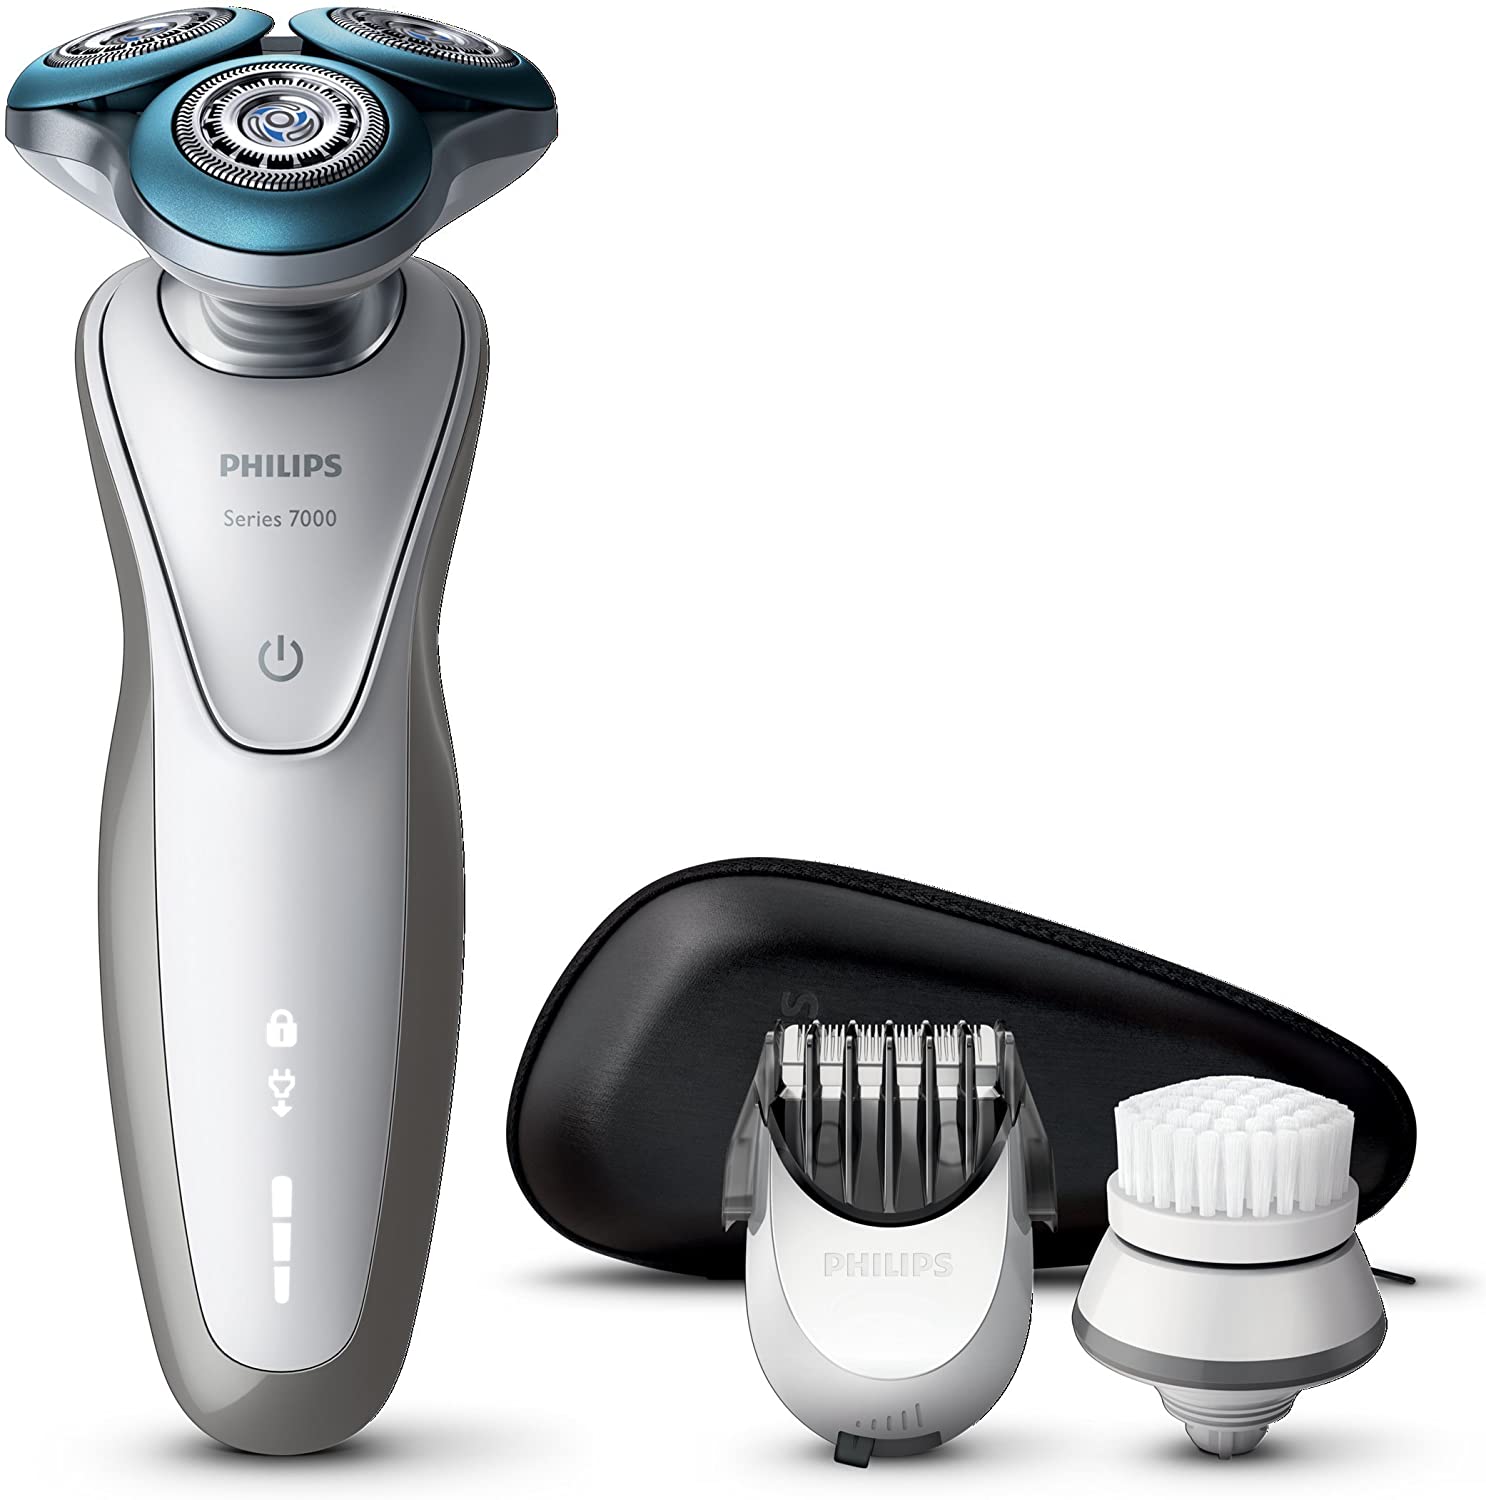 Philips Series 7000 Wet and Dry Men's Shaver in Bahrain - Halabh